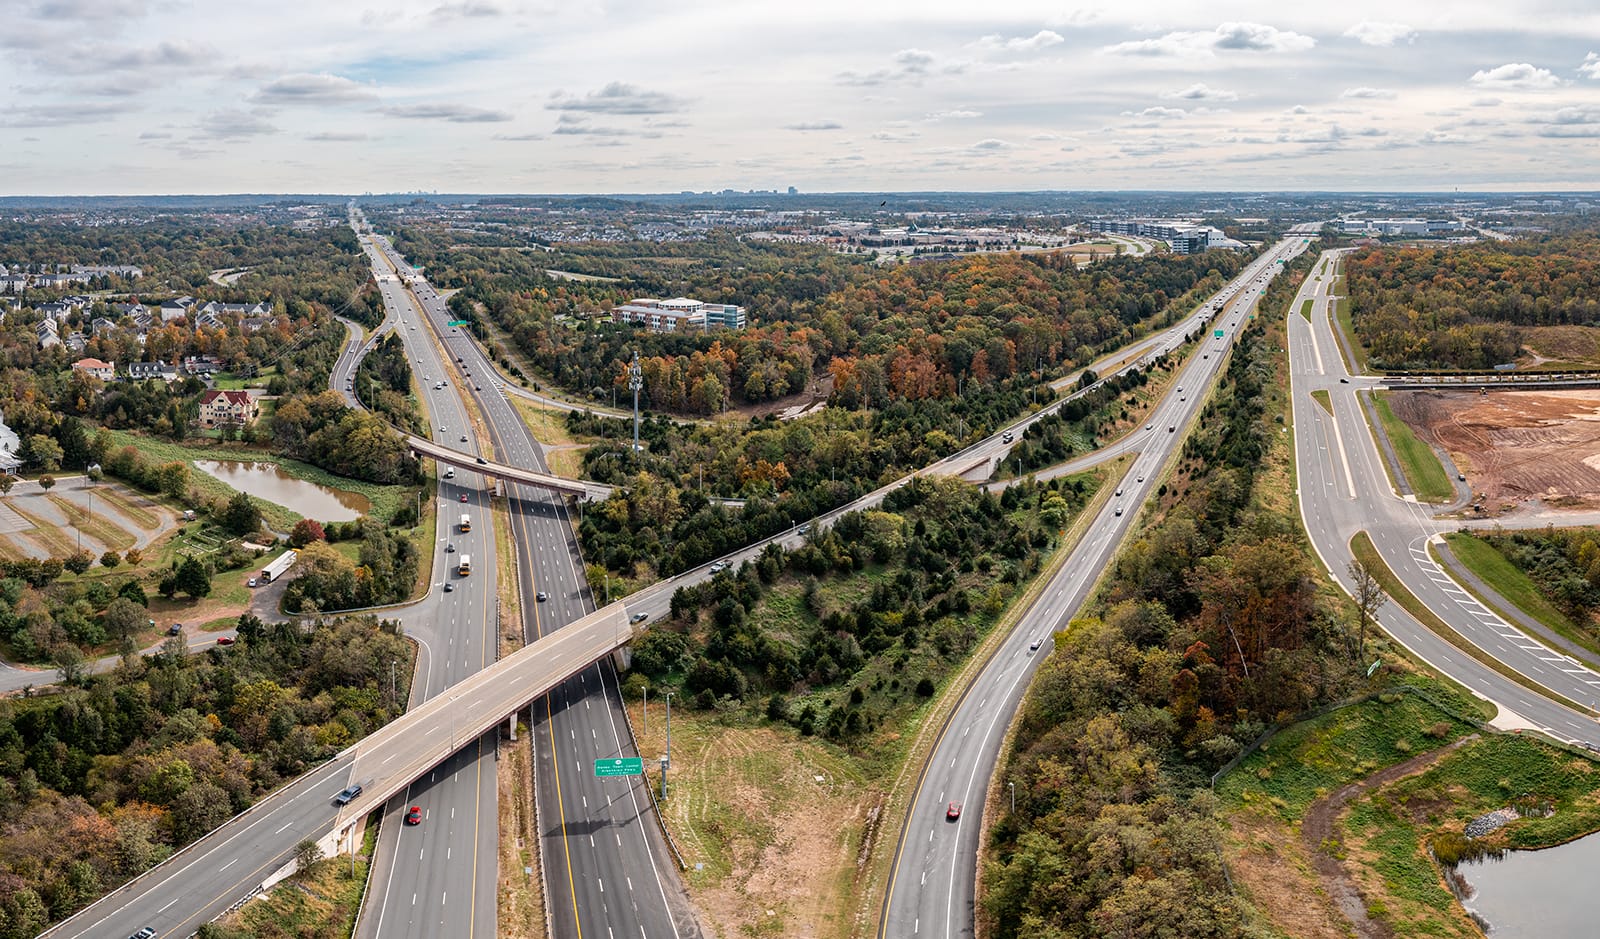 aerial image of overlapping highways surrounded by trees and suburban neighborhoods